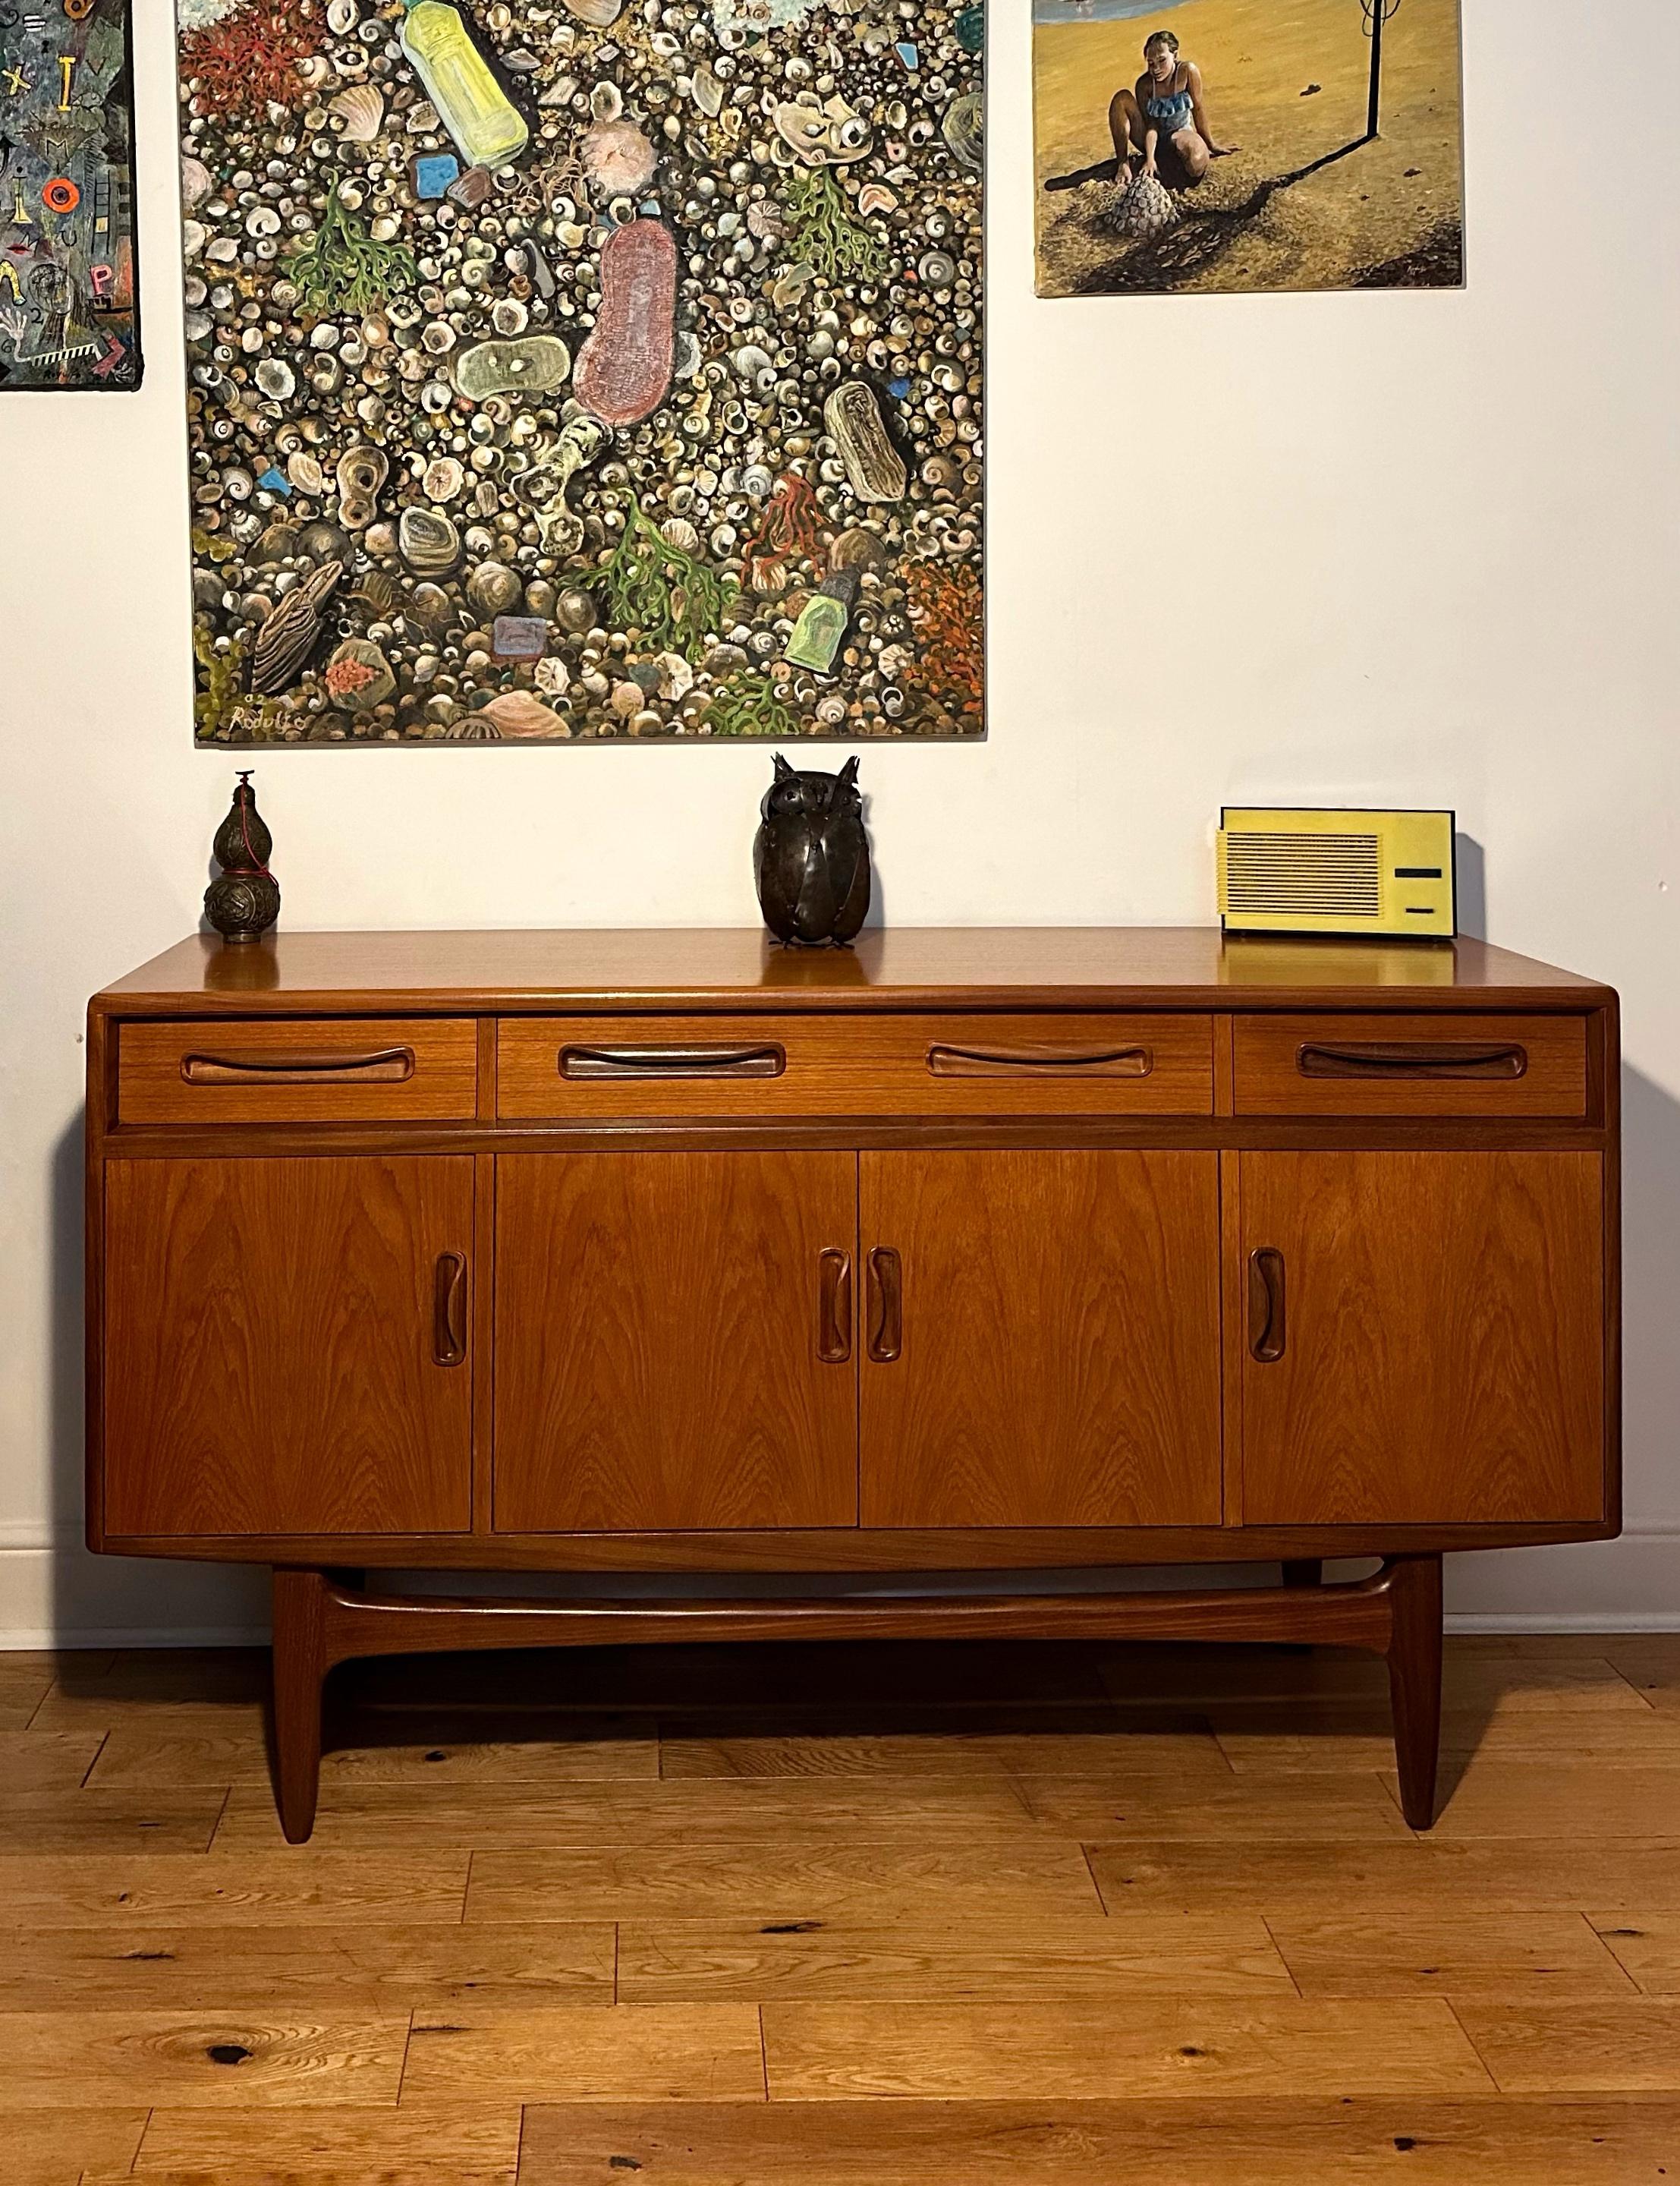  This beautiful sideboard was manufactured by G Plan in the 1960’s. 
Features three spacious cupboards with removable/adjustable shelves inside and three drawers. 
The sideboard rests on stylish tapered legs. Beautiful golden teak grain throughout -